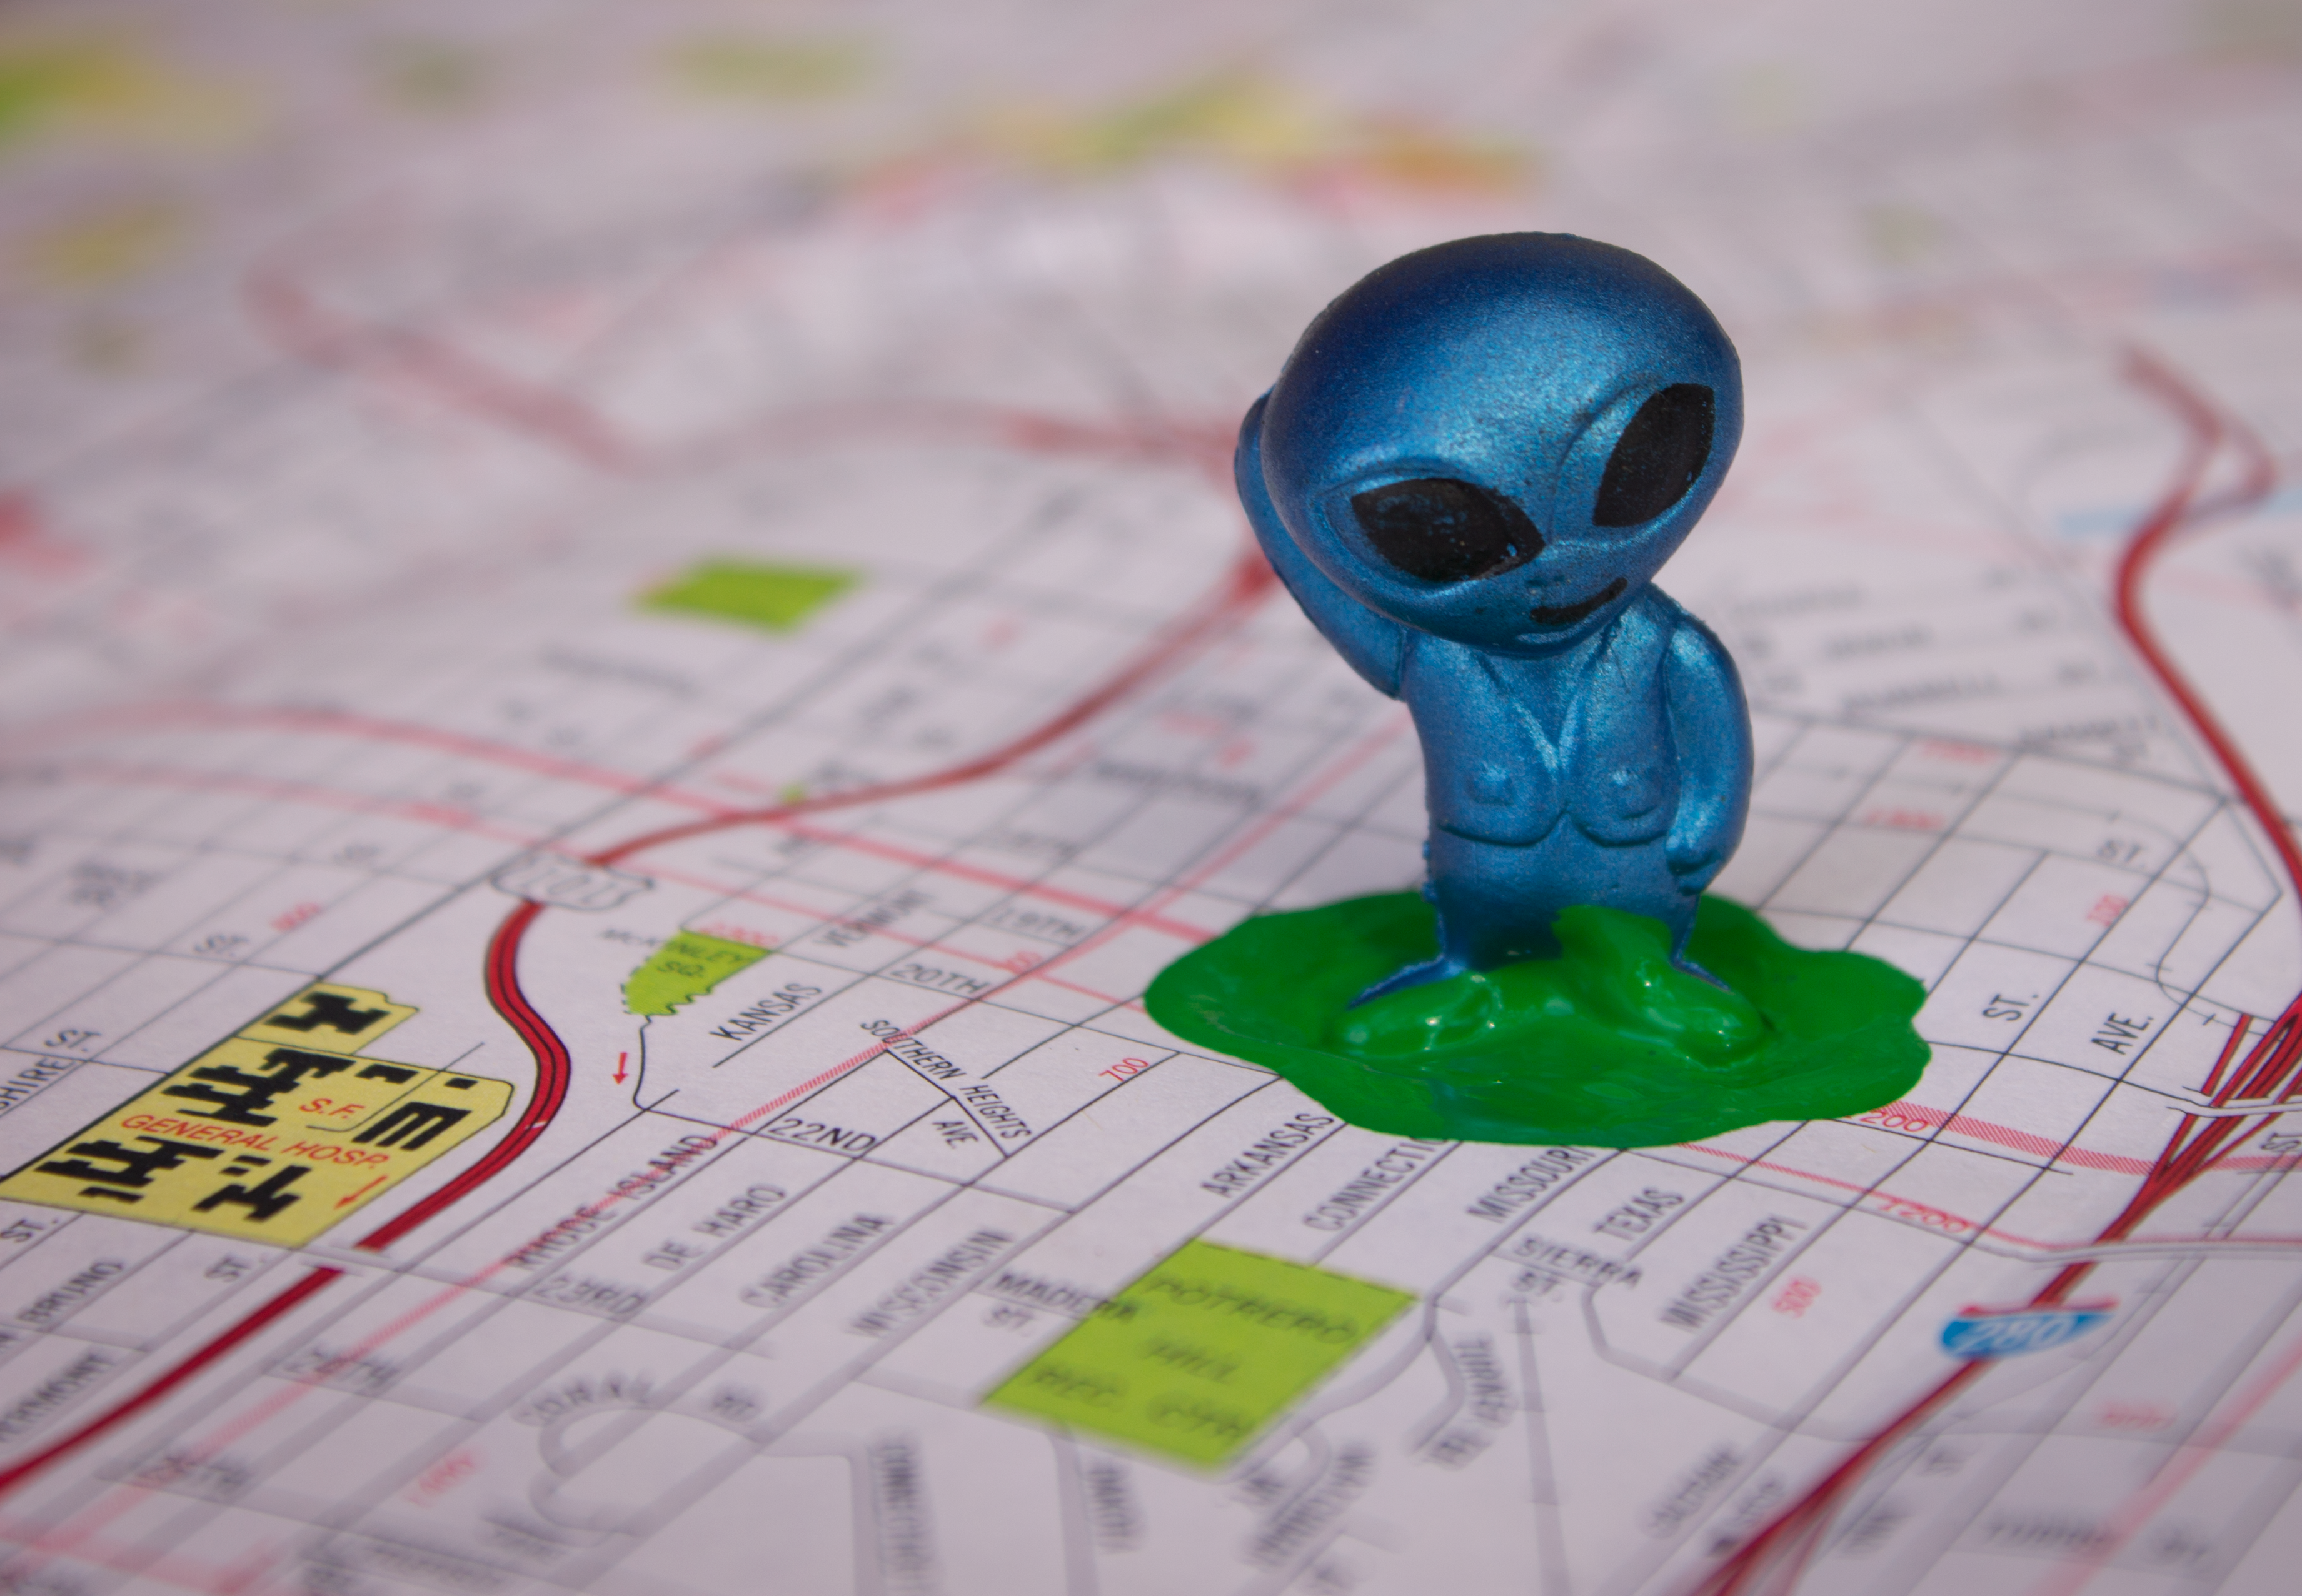 The photo is of a toy alien standing in a puddle of green paint on a map.